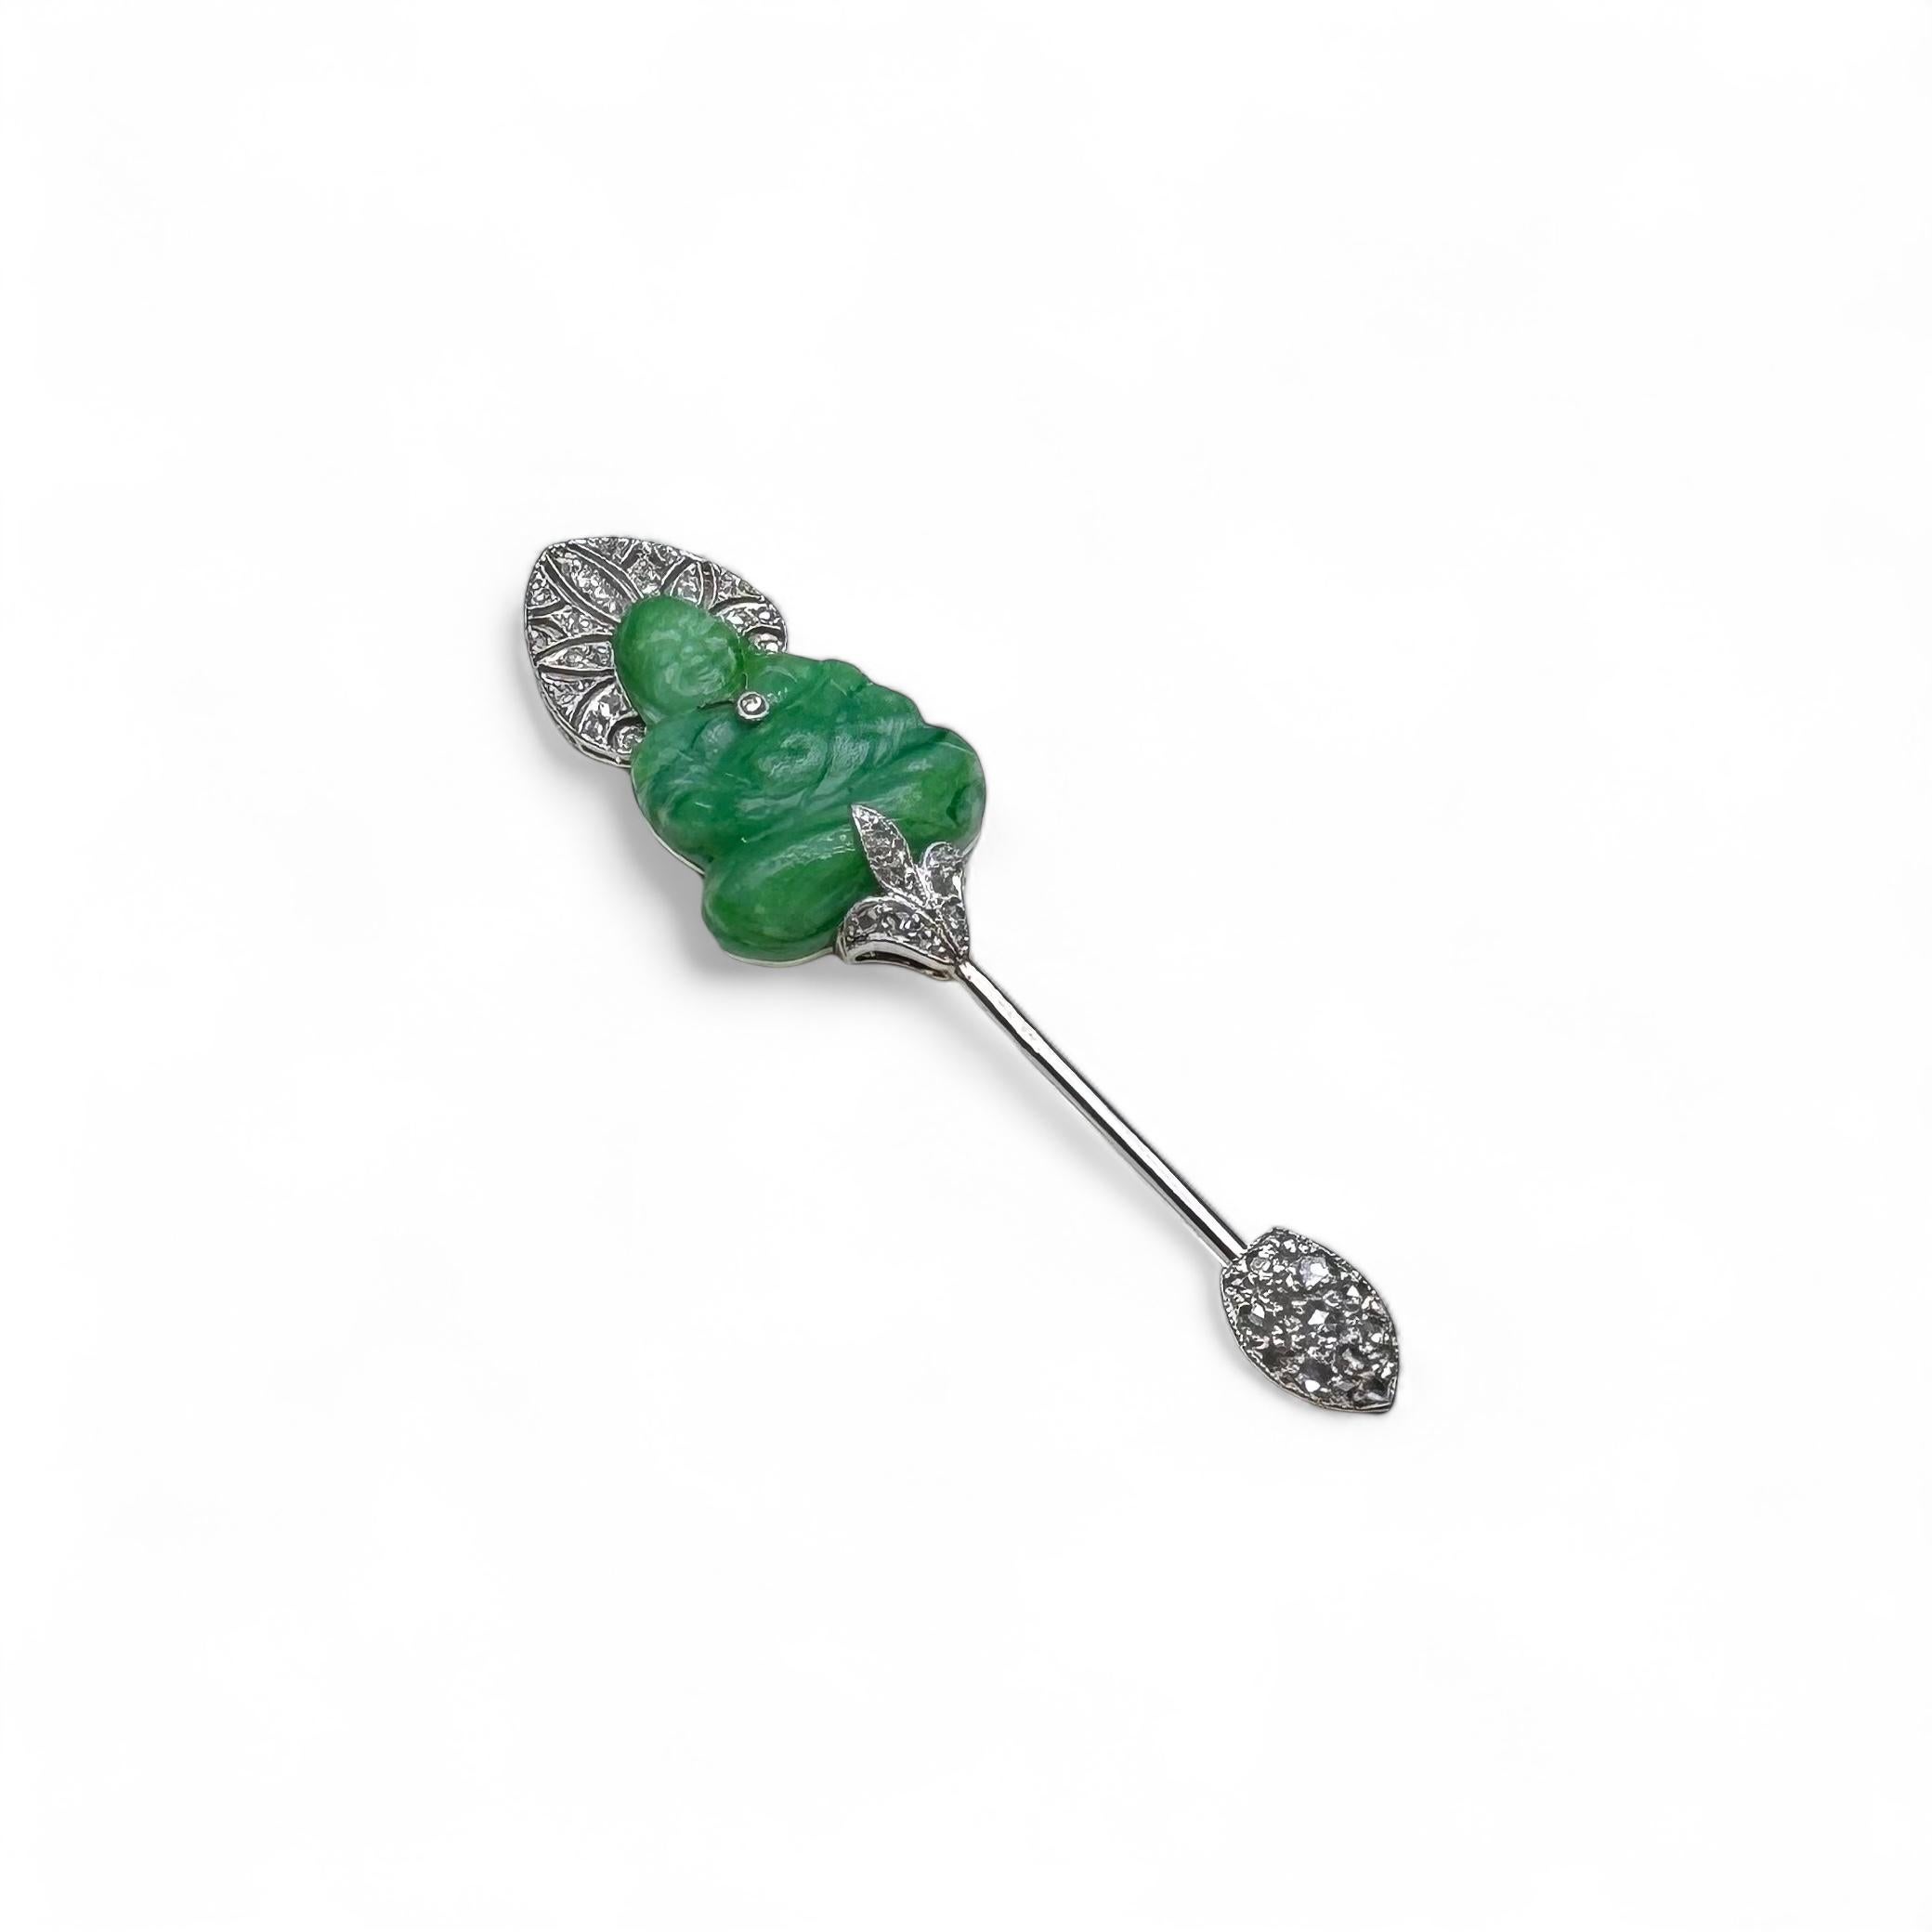 •Jabot pin in 18K white gold and platinum surmounted by a glass Buddha imitating jade, topped with an openwork halo and paved with pink-cut diamonds, the end of the pin and the Buddha's seat also set with pink-cut diamonds. •Work around 1925.